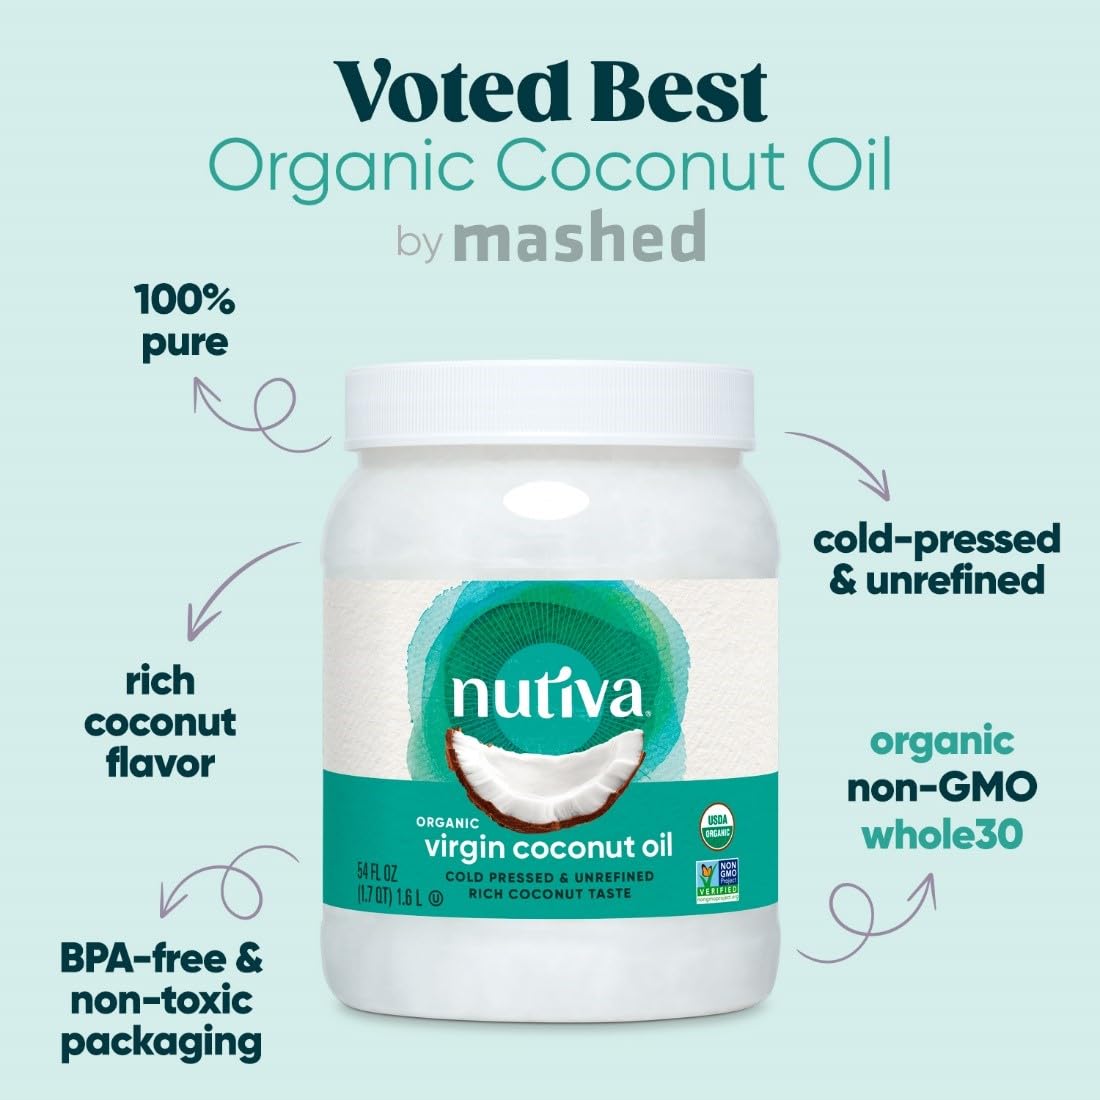 Nutiva Organic Coconut Oil 54 fl oz, Cold-Pressed, Fresh Flavor for Cooking, Natural Hair, Skin, Massage Oil and, Non-GMO, USDA Organic, Unrefined Extra Virgin Coconut Oil (Aceite de Coco) : Grocery & Gourmet Food